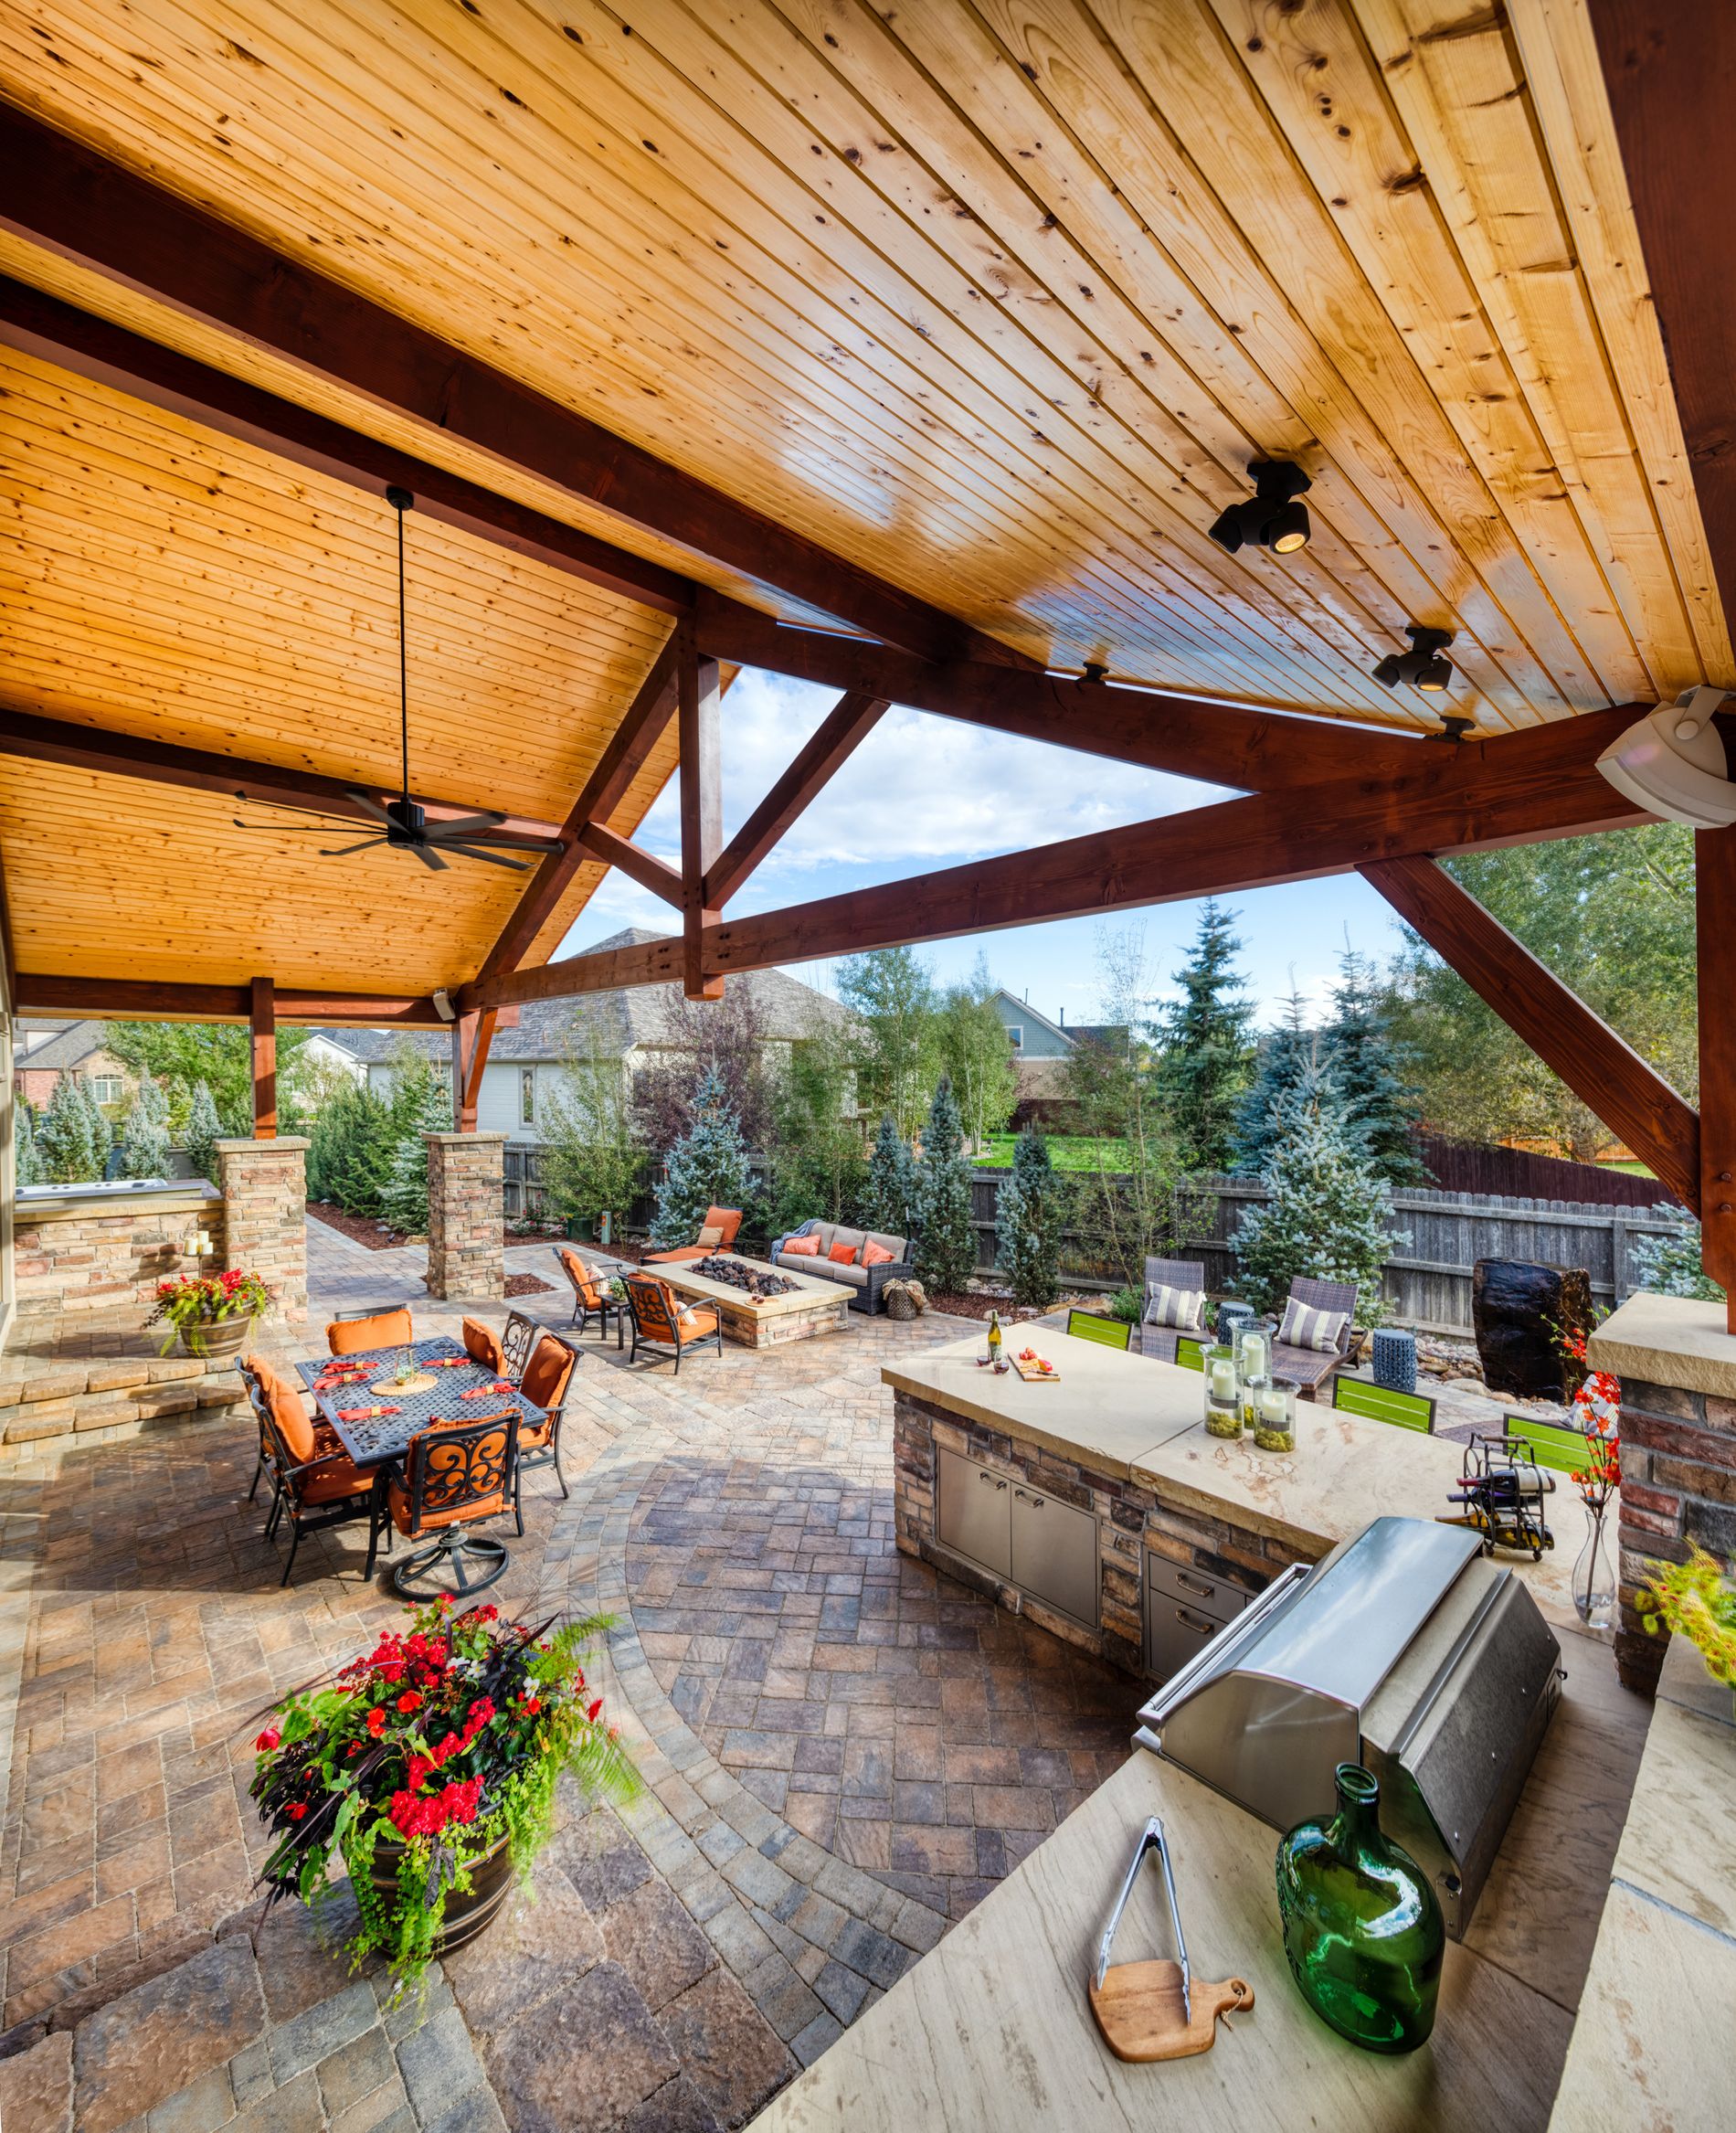 Timber frame gable roof covers this outdoor kitchen